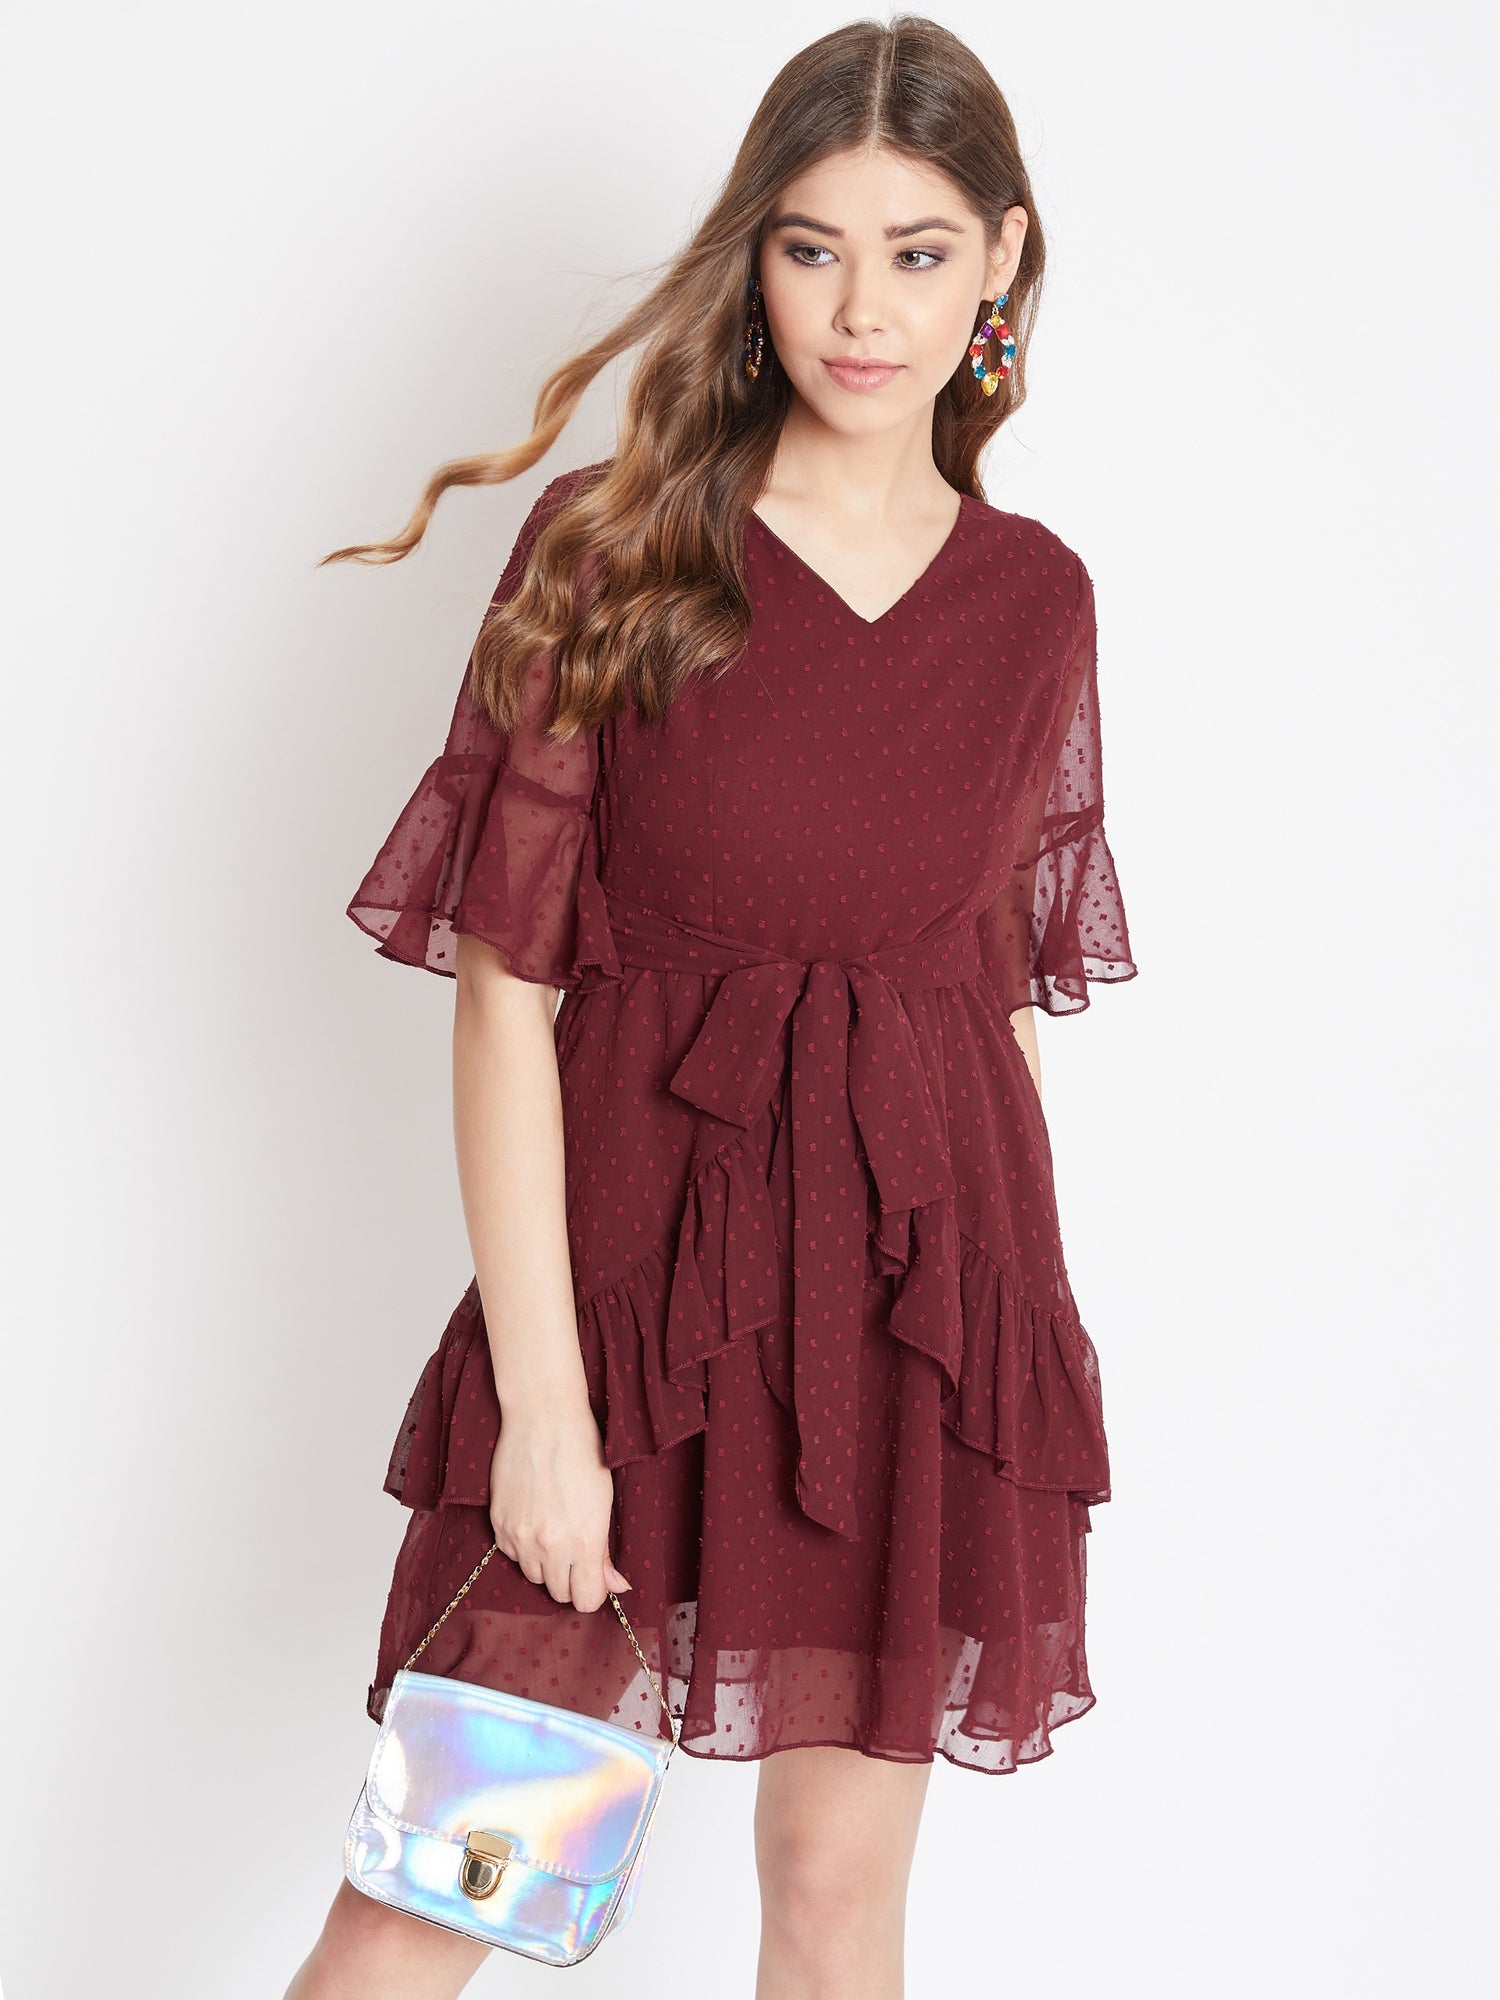 Casual Solid Round Neck Fit and Flare Dress Long Sleeve Burgundy